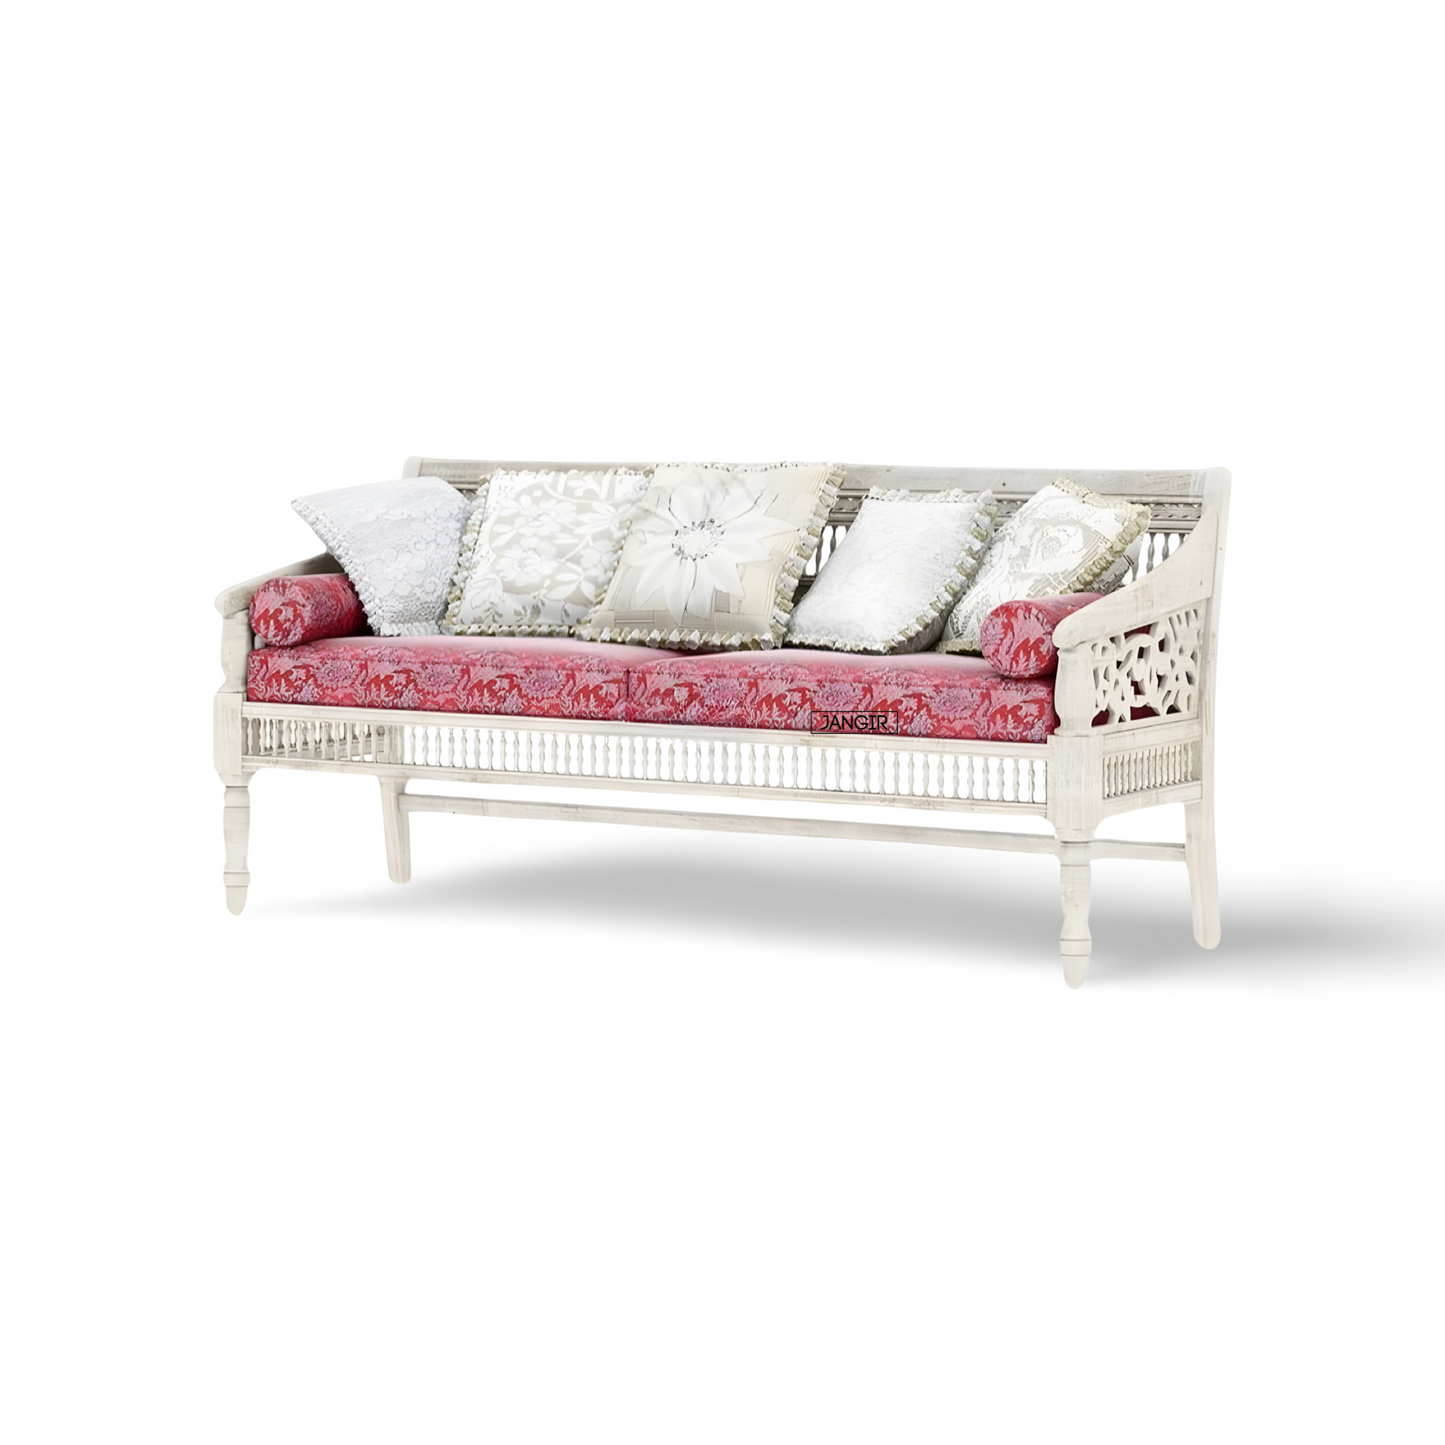 Discover the timeless beauty of our white rustic carved sofa. Handcrafted from premium sheesham wood, this traditional-style piece adds elegance and charm to any living space. Shop now!